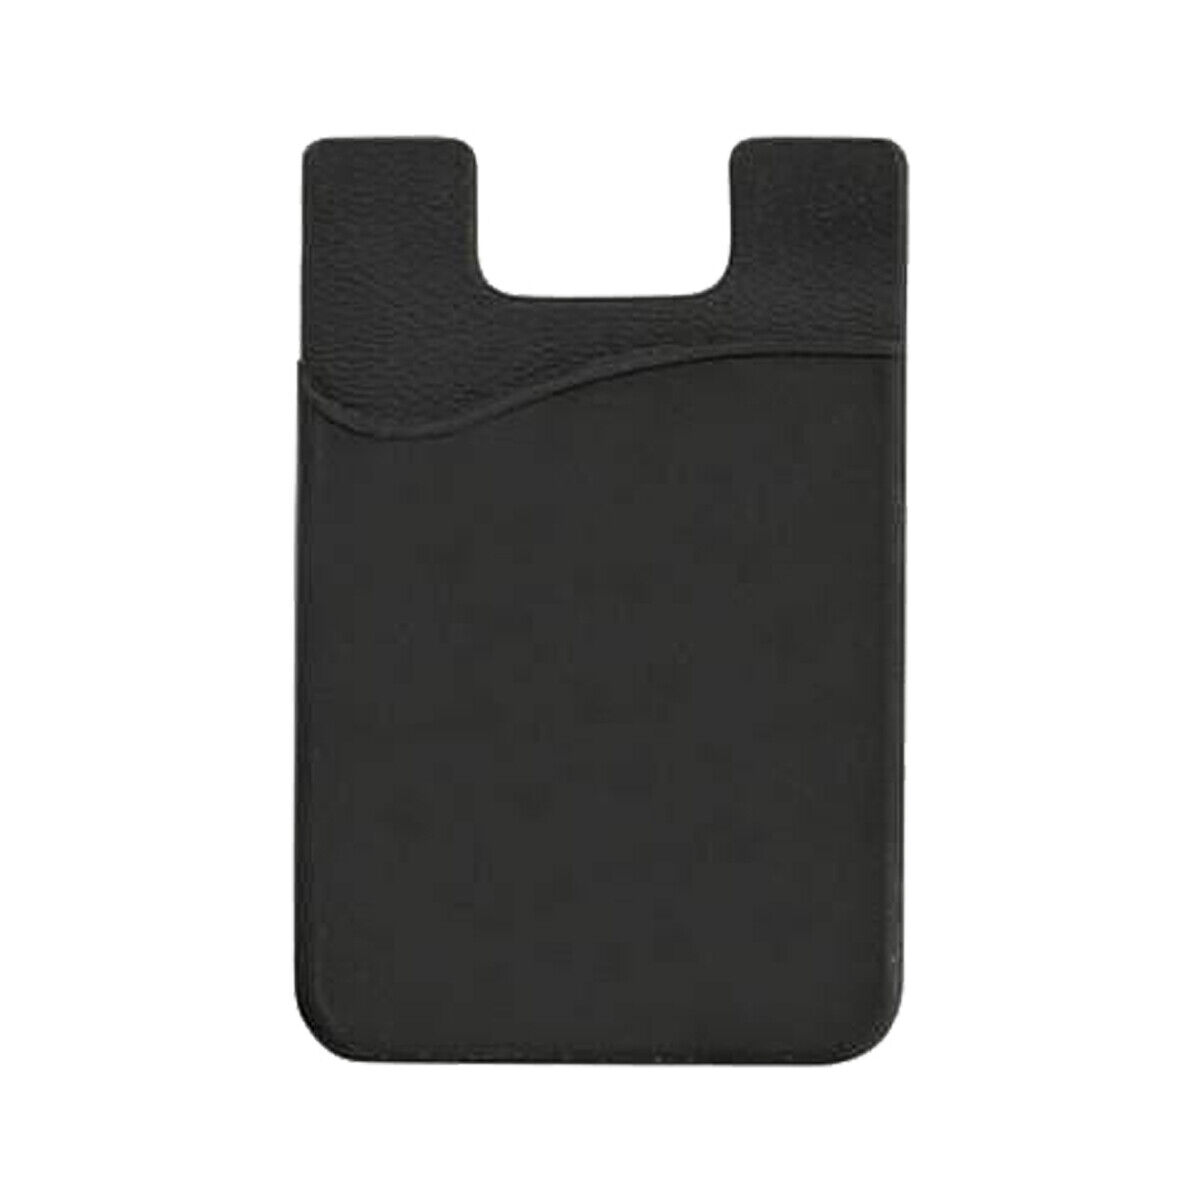 2 - Silicone Cell Phone Wallets - Adhesive Back Pocket for ID Badge Credit Cards Specialist ID SPID-050X